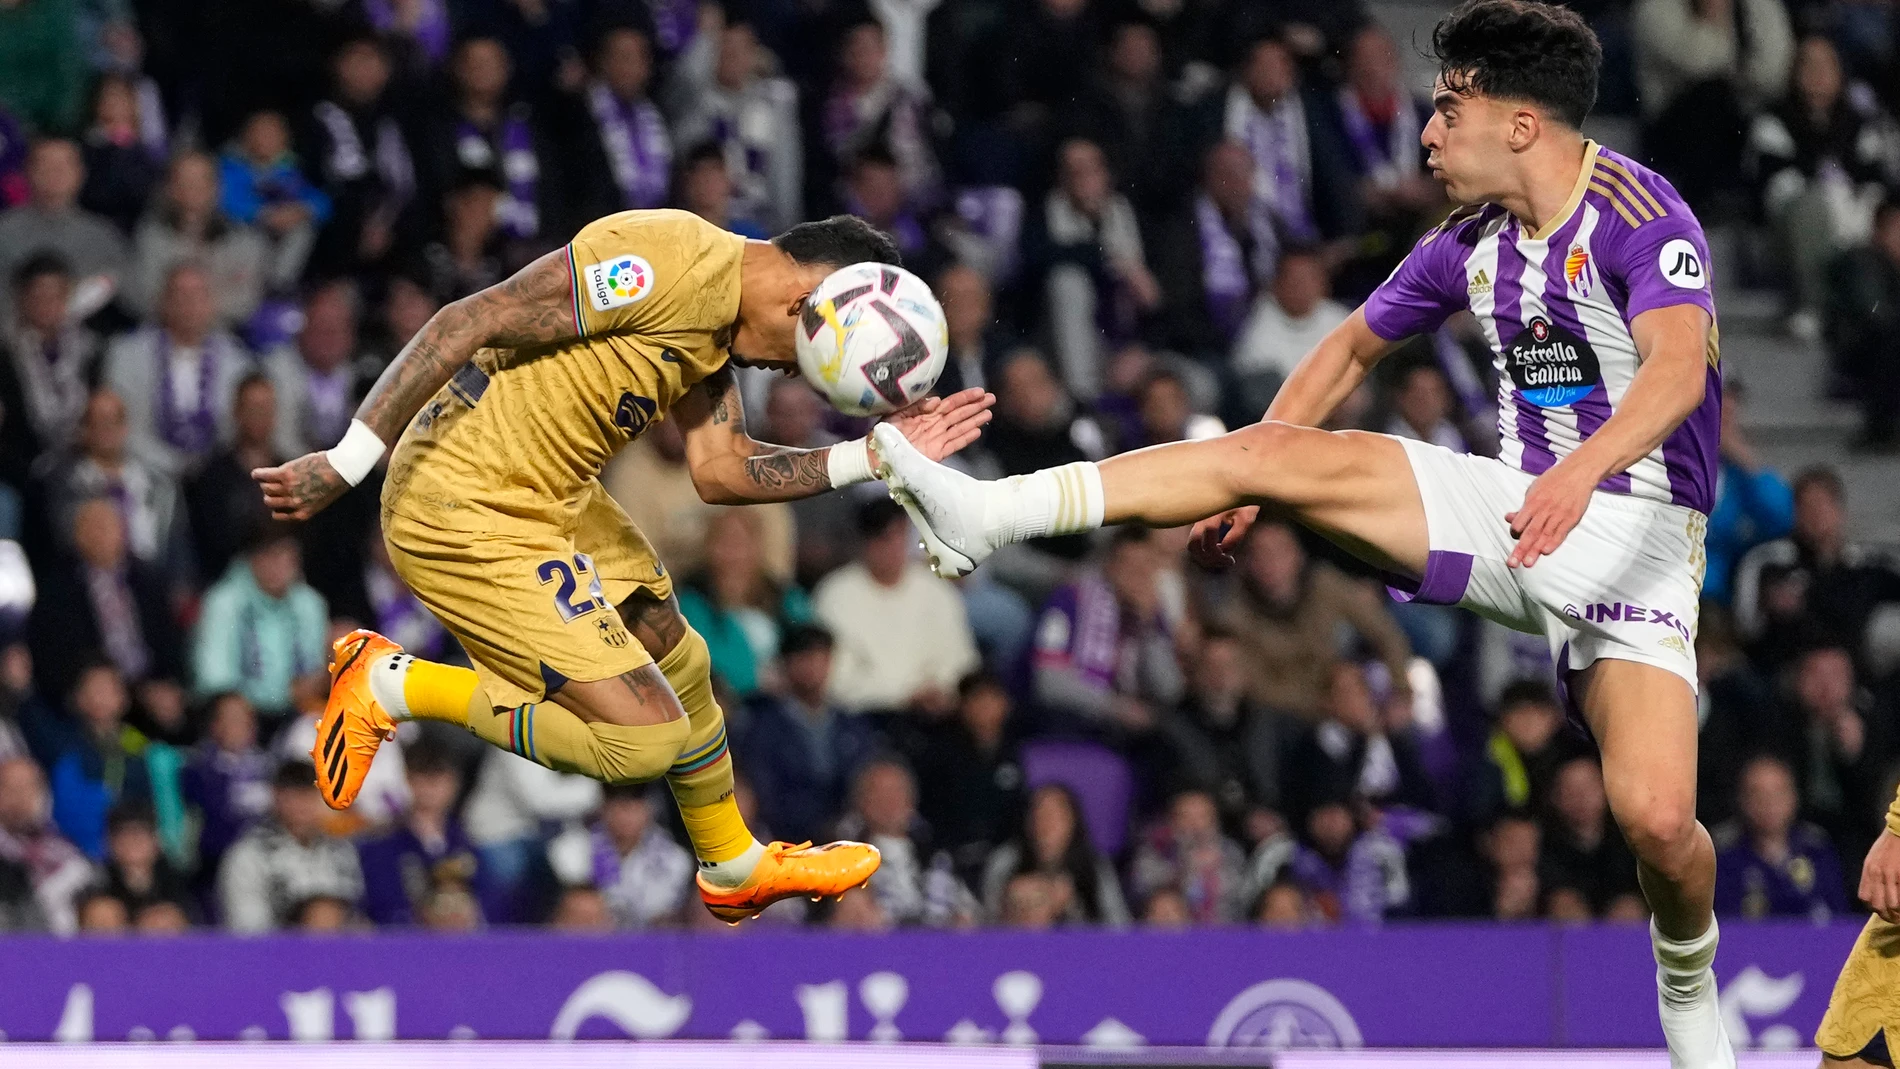 Valladolid's Alvaro Aguado, right, and Barcelona's Raphinha compete for the ball during Spanish La Liga soccer match between Valladolid and FC Barcelona at the Jose Zorrilla stadium in Valladolid, Spain, Tuesday, May 23, 2023. (AP Photo/Manu Fernandez)